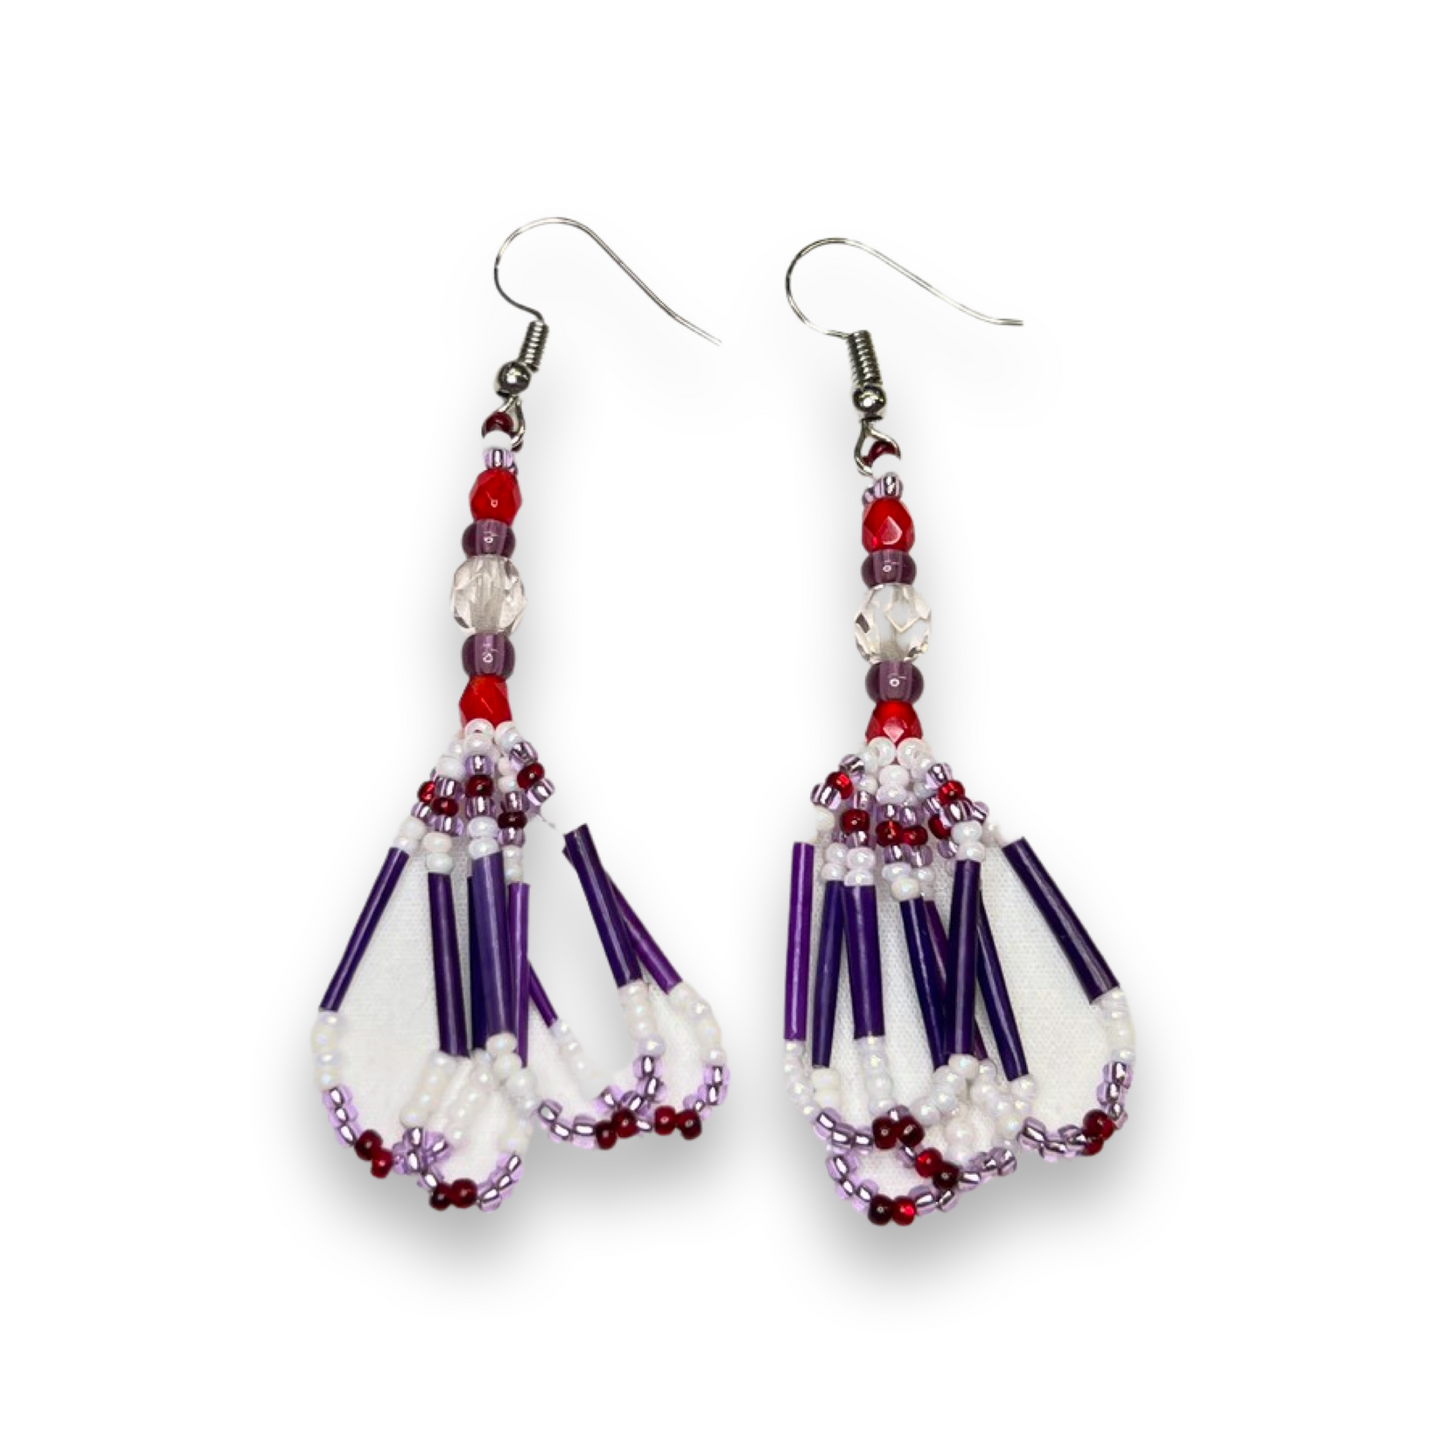 KT Bead and Quill Earrings